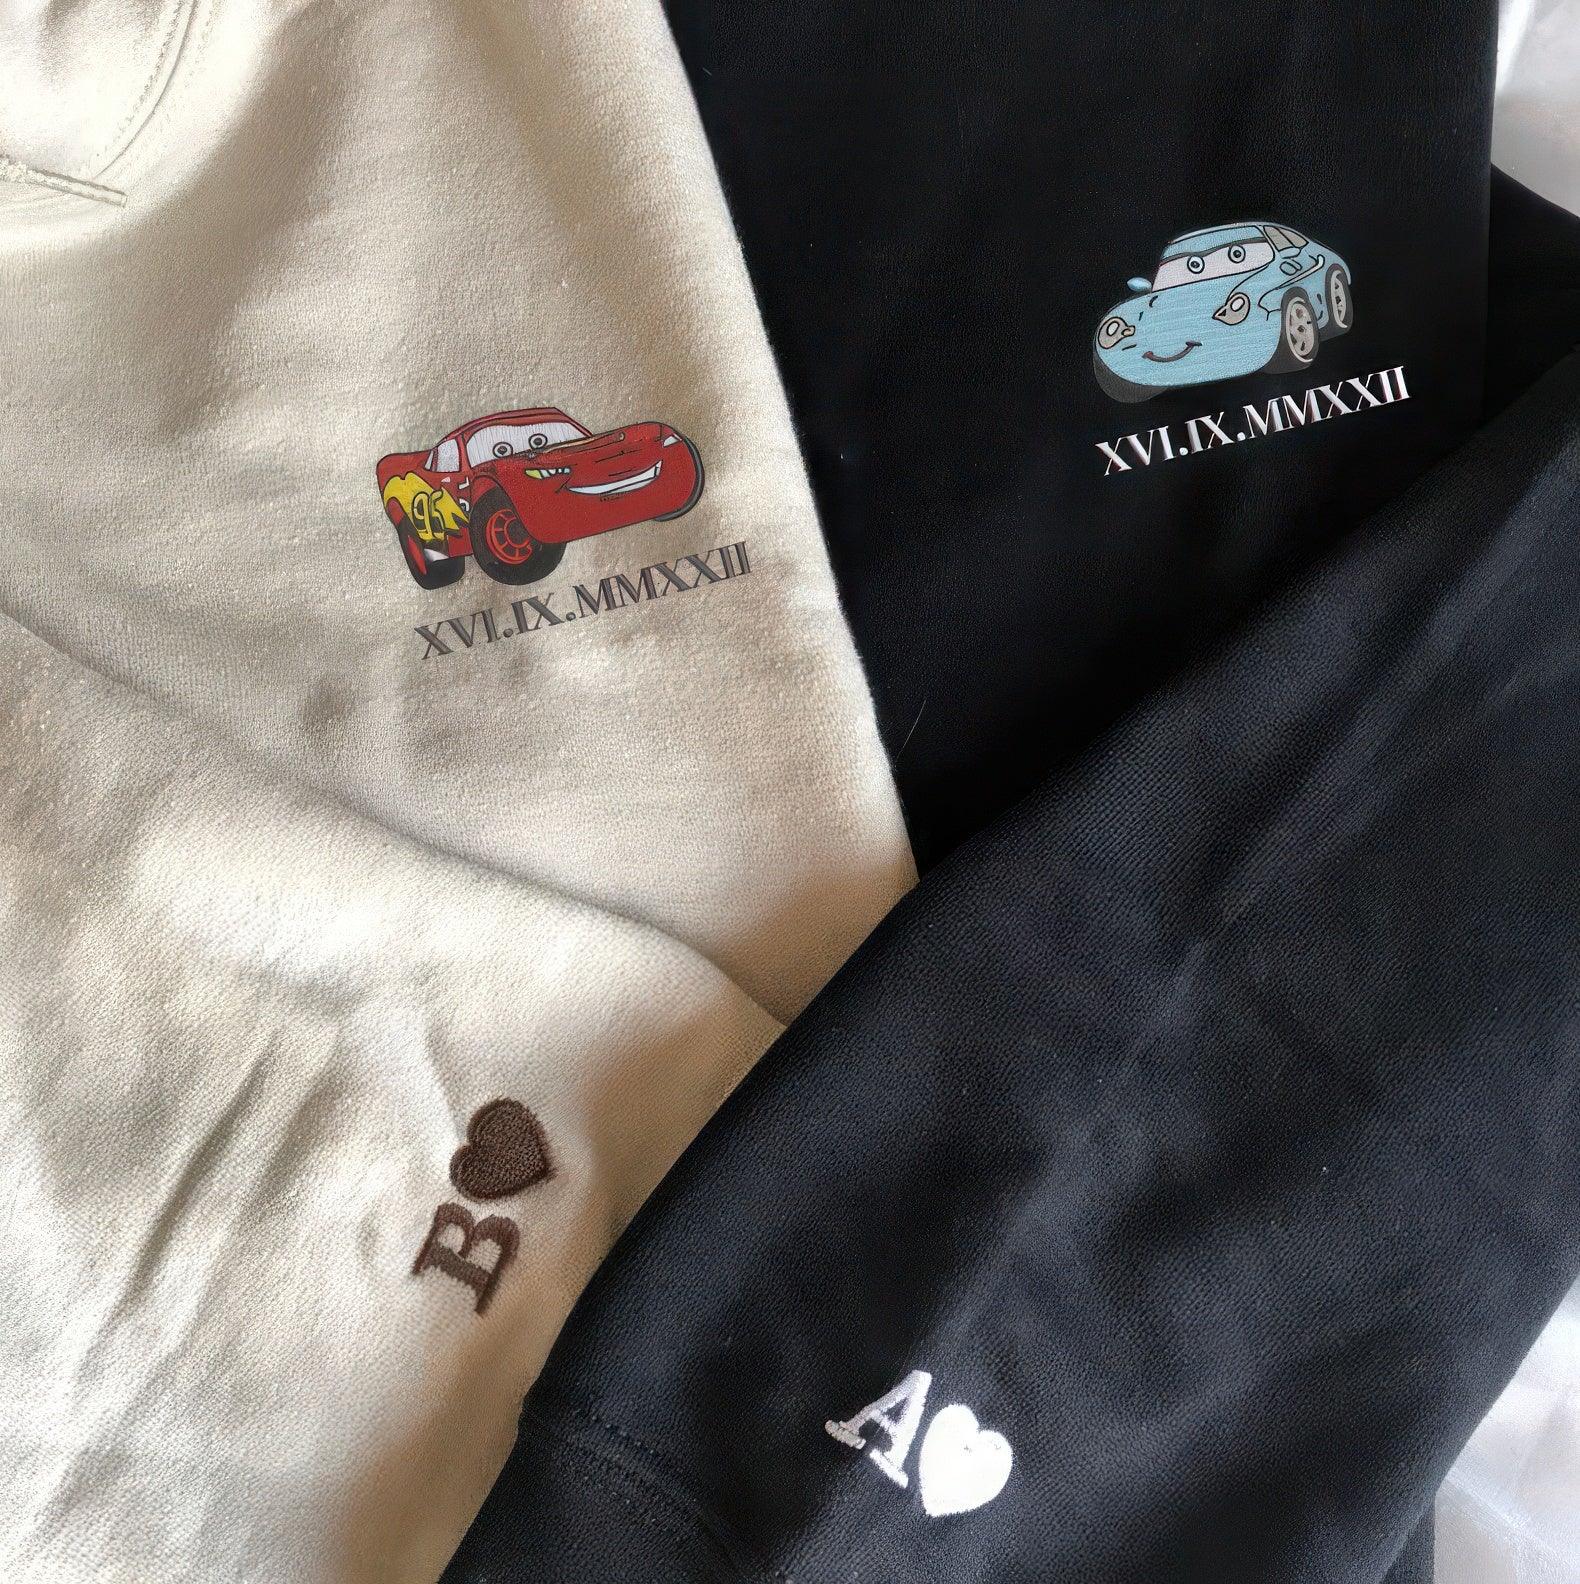 Custom Embroidered Sweatshirts For Couples, Custom Anniversary Date Cars Mcqueen x Sally Embroidered Couple Sweatshirt